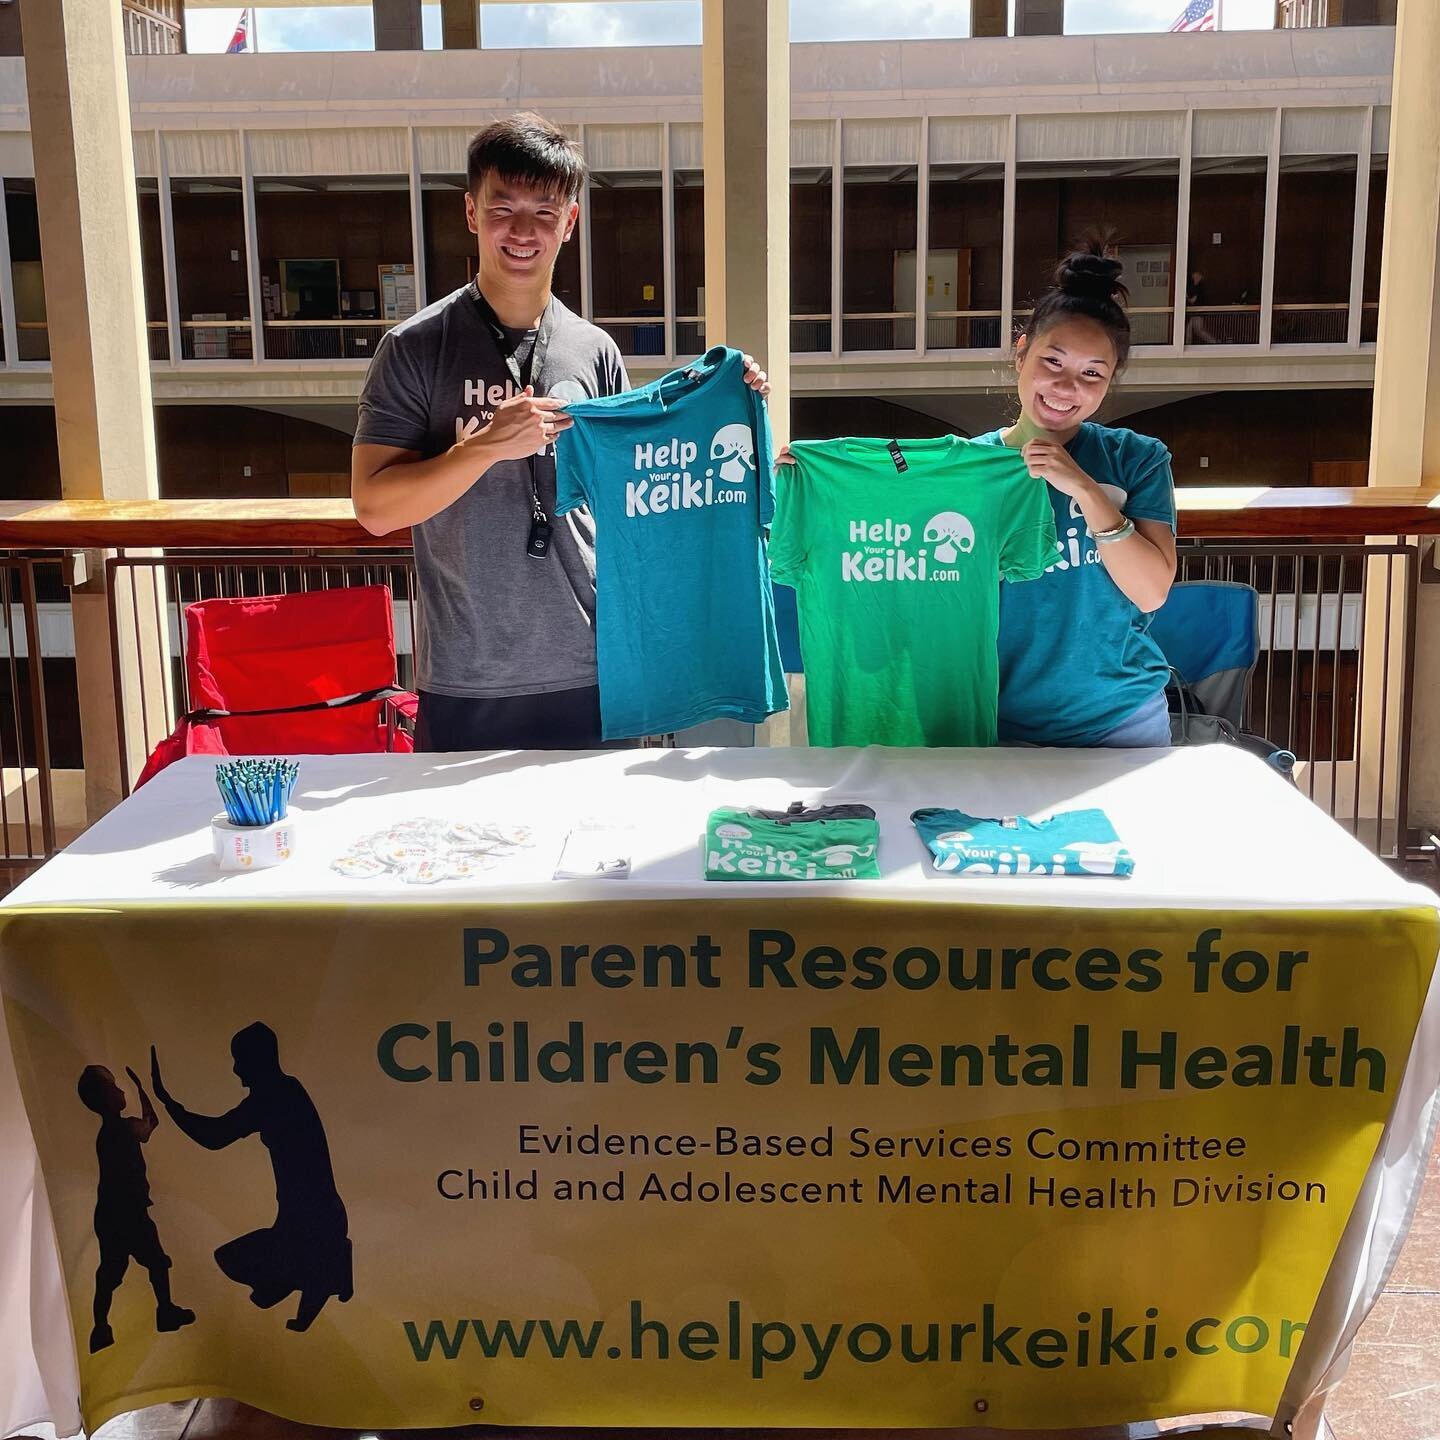 We&rsquo;re at &lsquo;Day at the Capitol&rsquo; for the mental health resource fair until 2:00pm today!
.
.
#helpyourkeiki #evidencebasedpractice #mentalhealthmatters #keikimentalhealthmatters